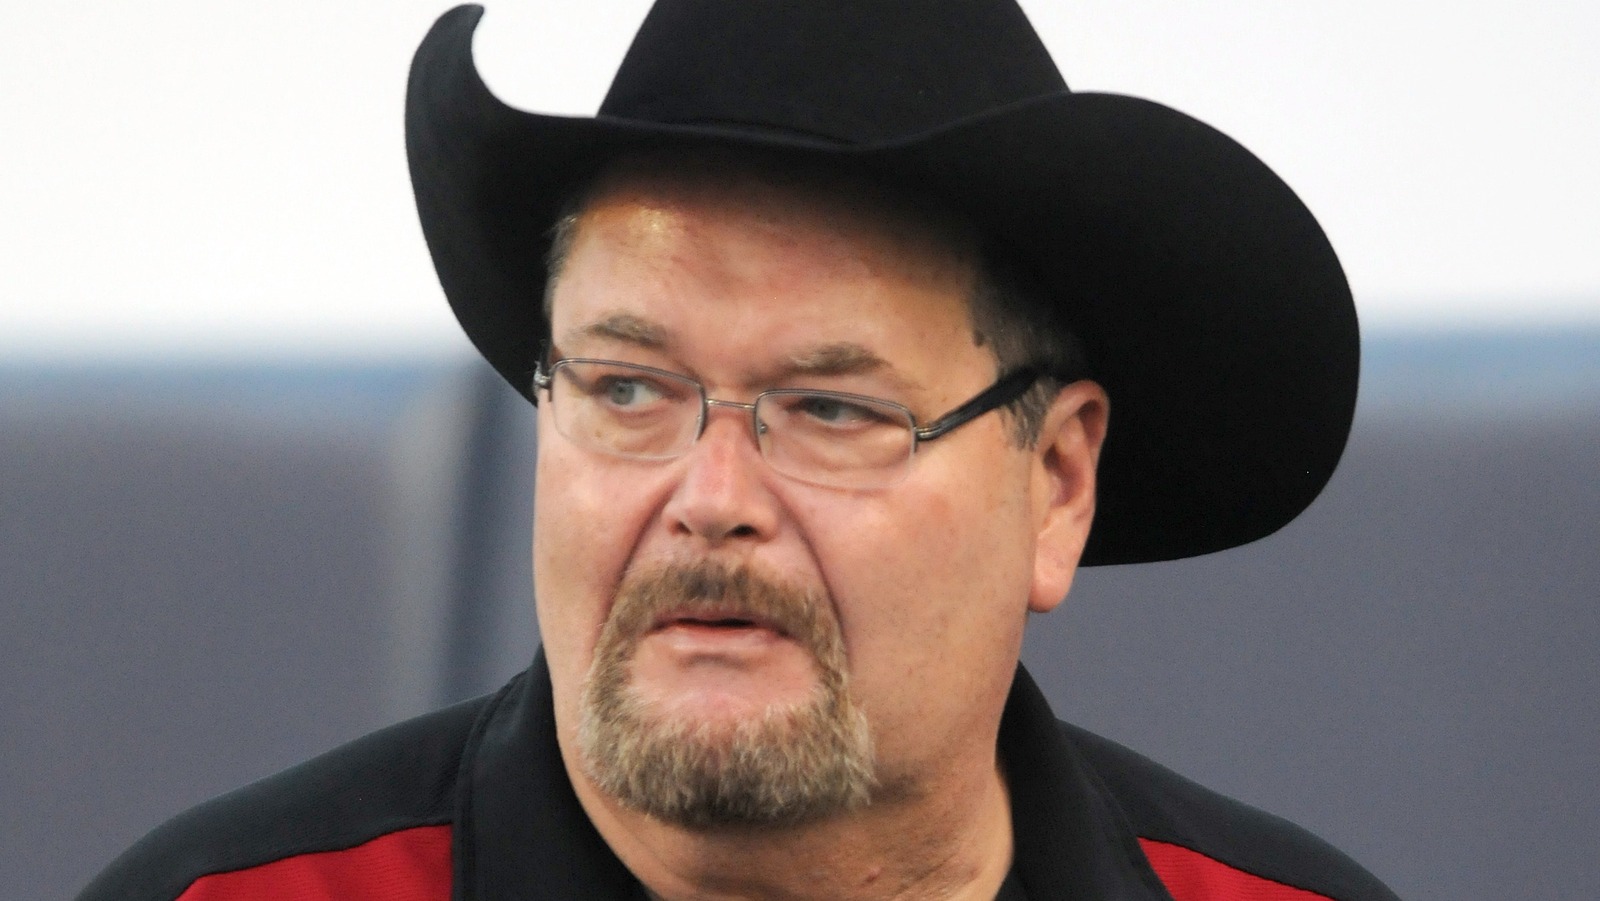 Jim Ross Weighs In On The Idea Of A Physical WWE Hall Of Fame